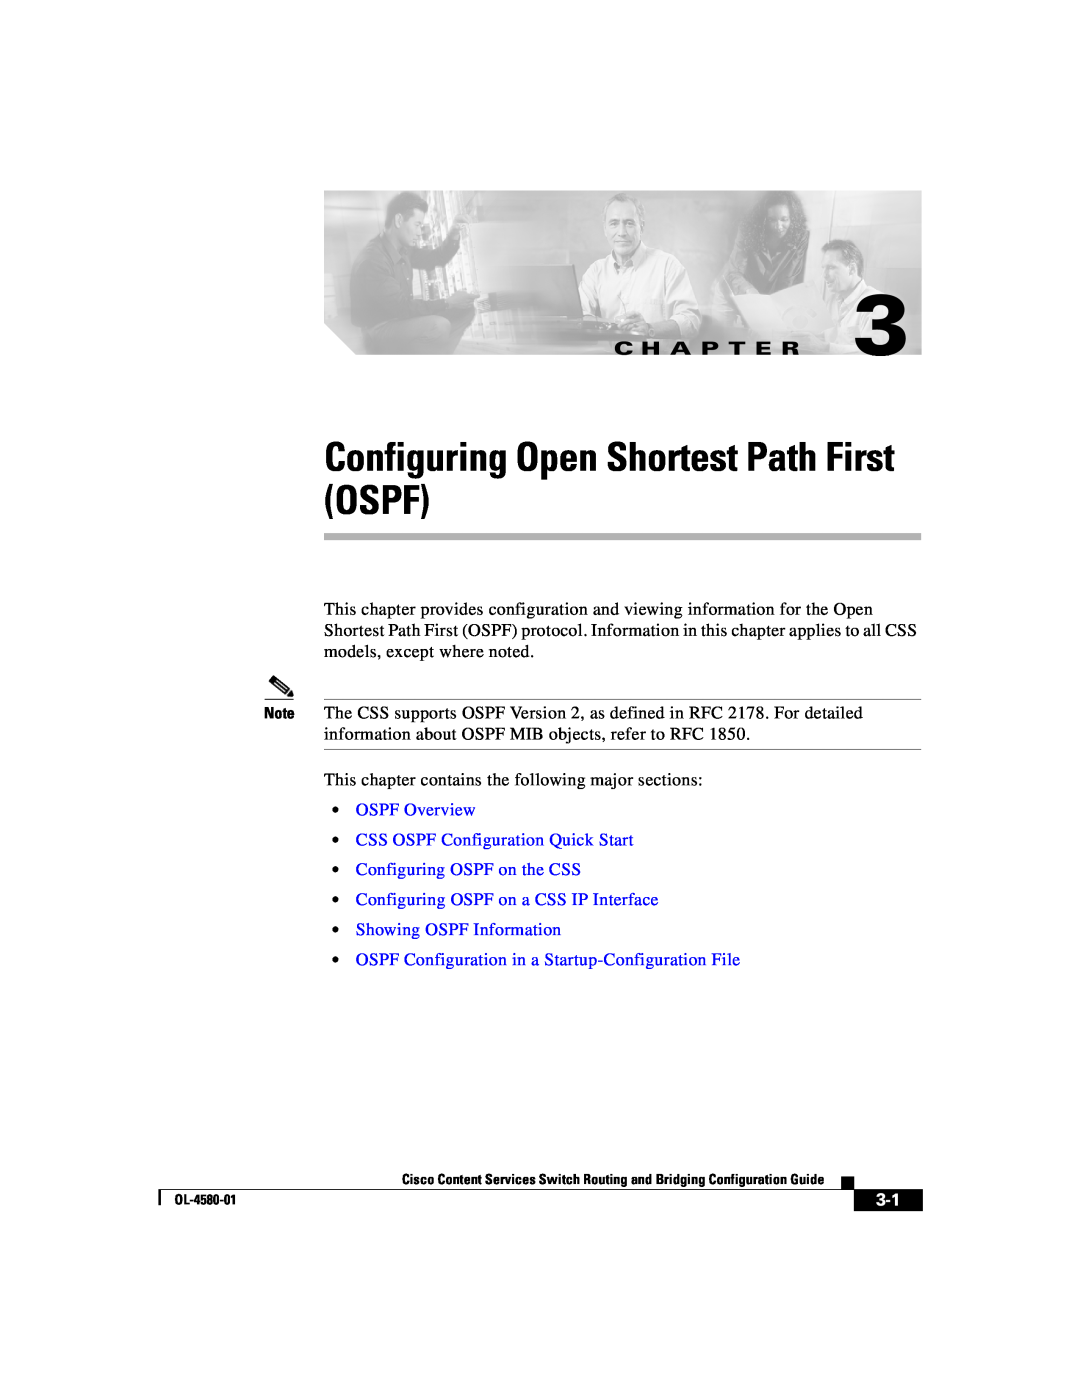 Cisco Systems OL-4580-01 manual Configuring Open Shortest Path First OSPF, C H A P T E R, Showing OSPF Information 